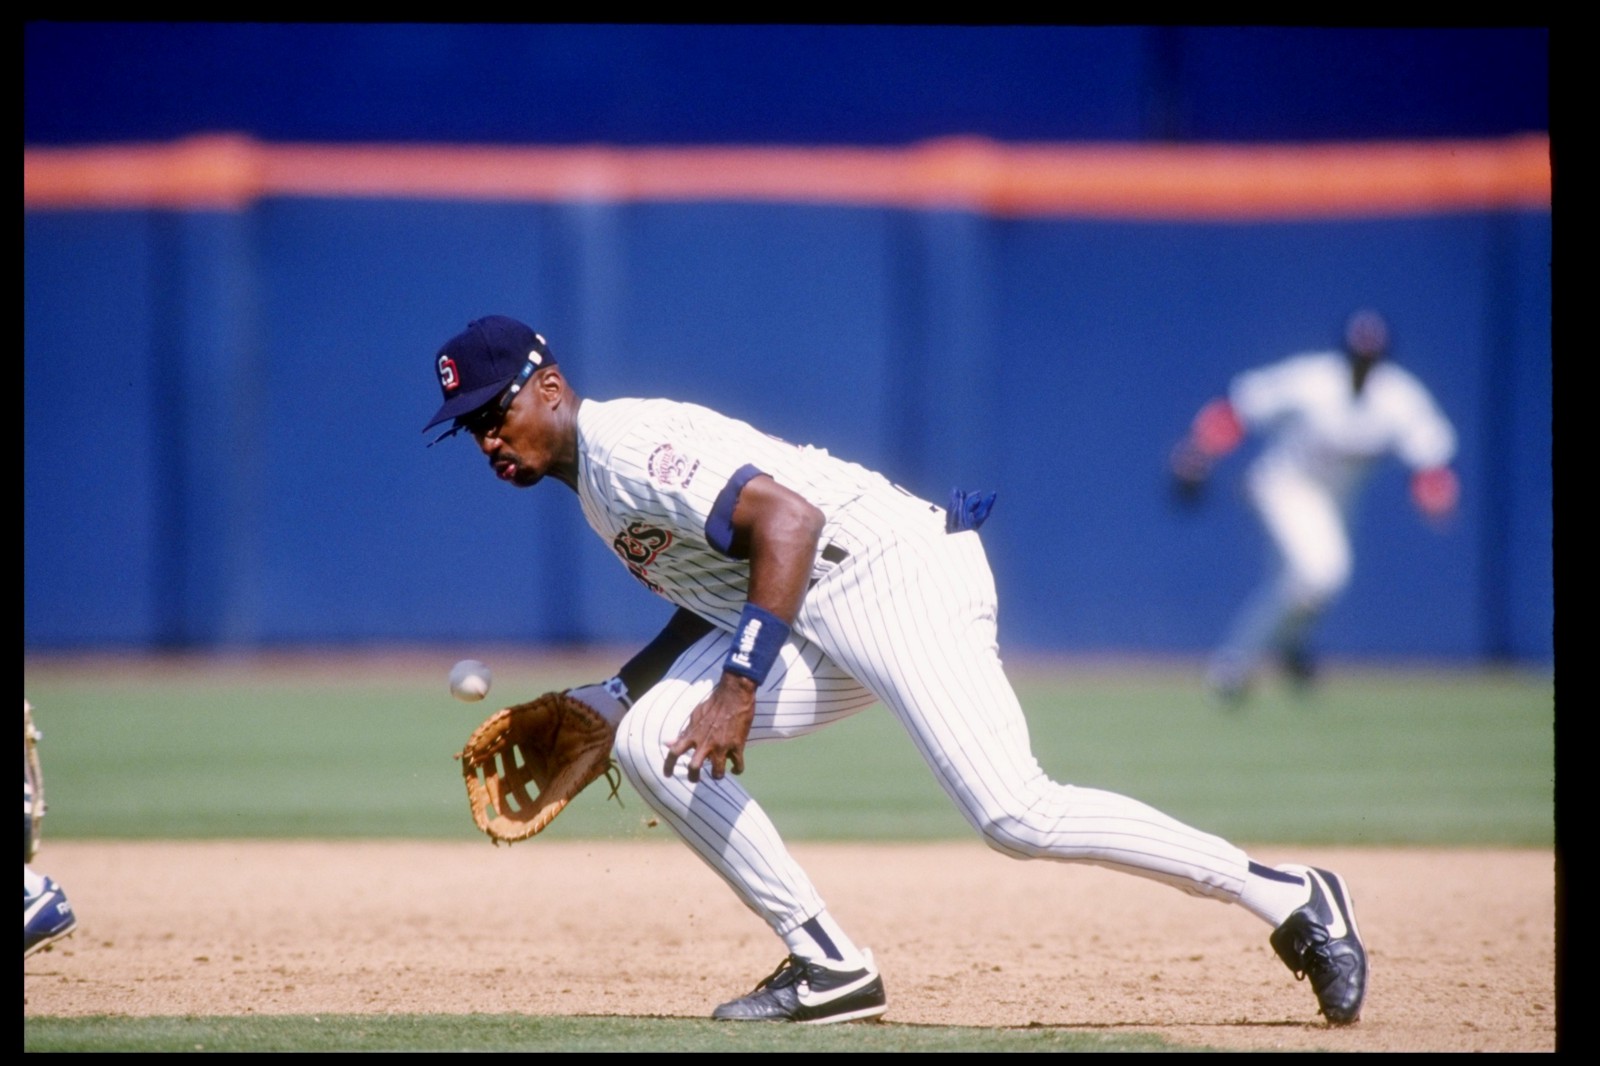 MLB - Fred McGriff is headed to Cooperstown! He's been